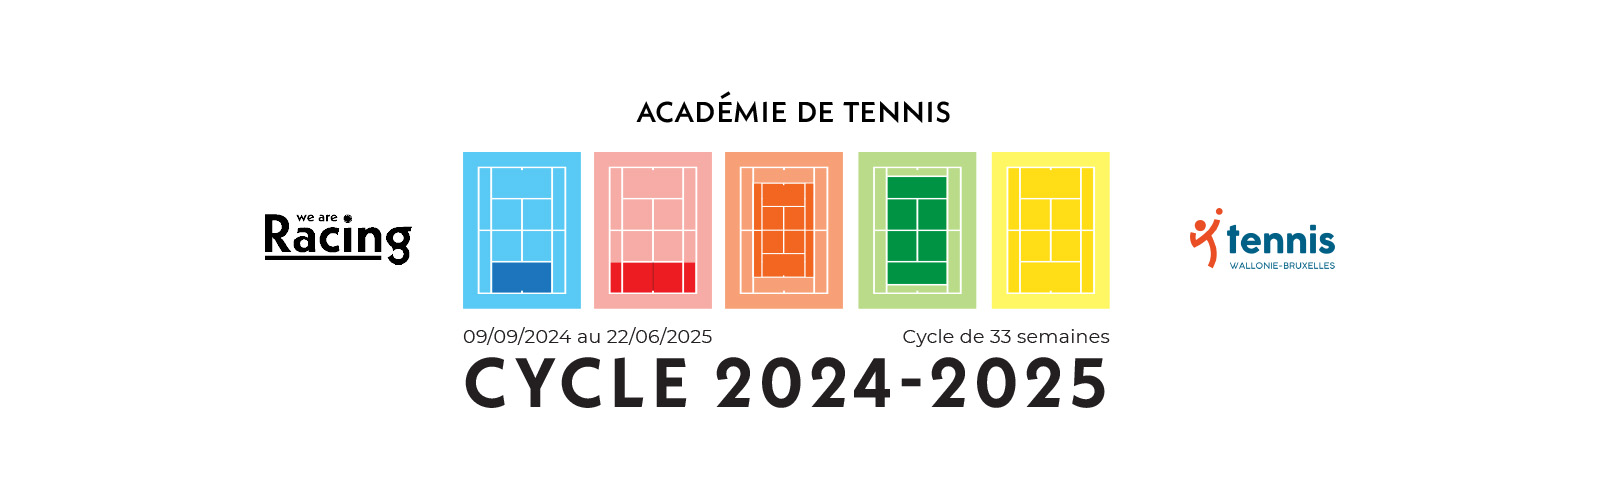 Tennis Cycle 2024-2025